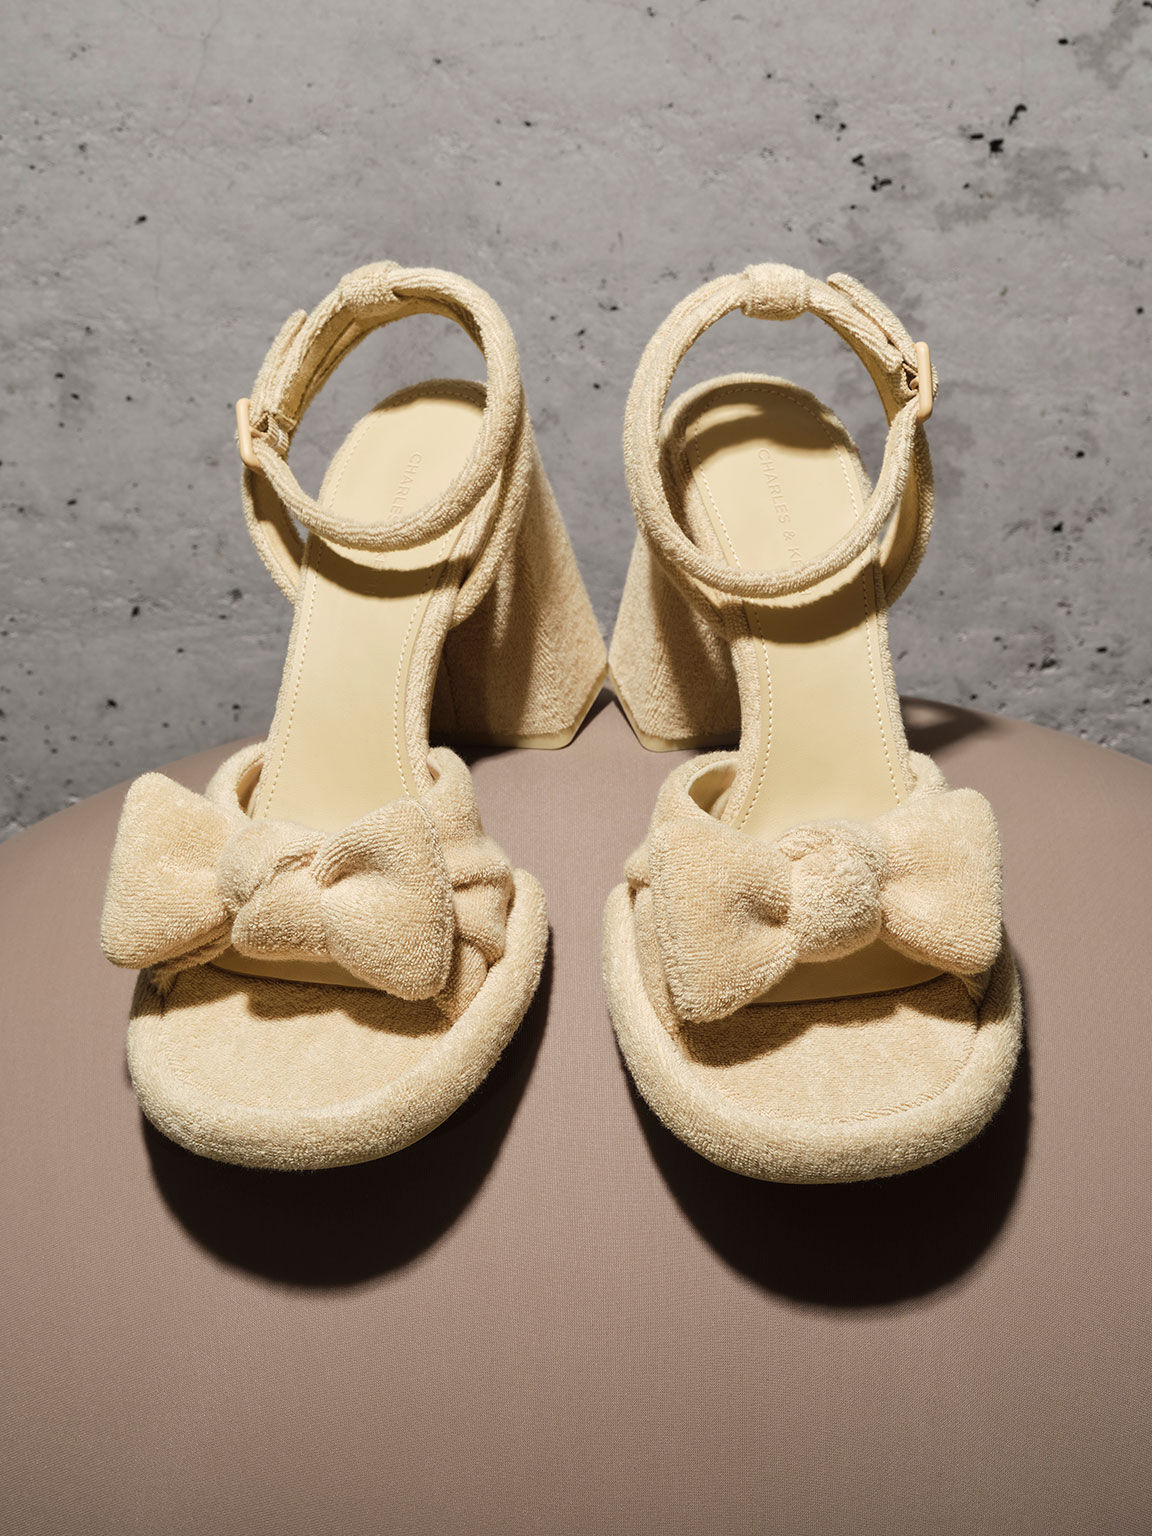 Loey Textured Bow Ankle-Strap Sandals - Beige